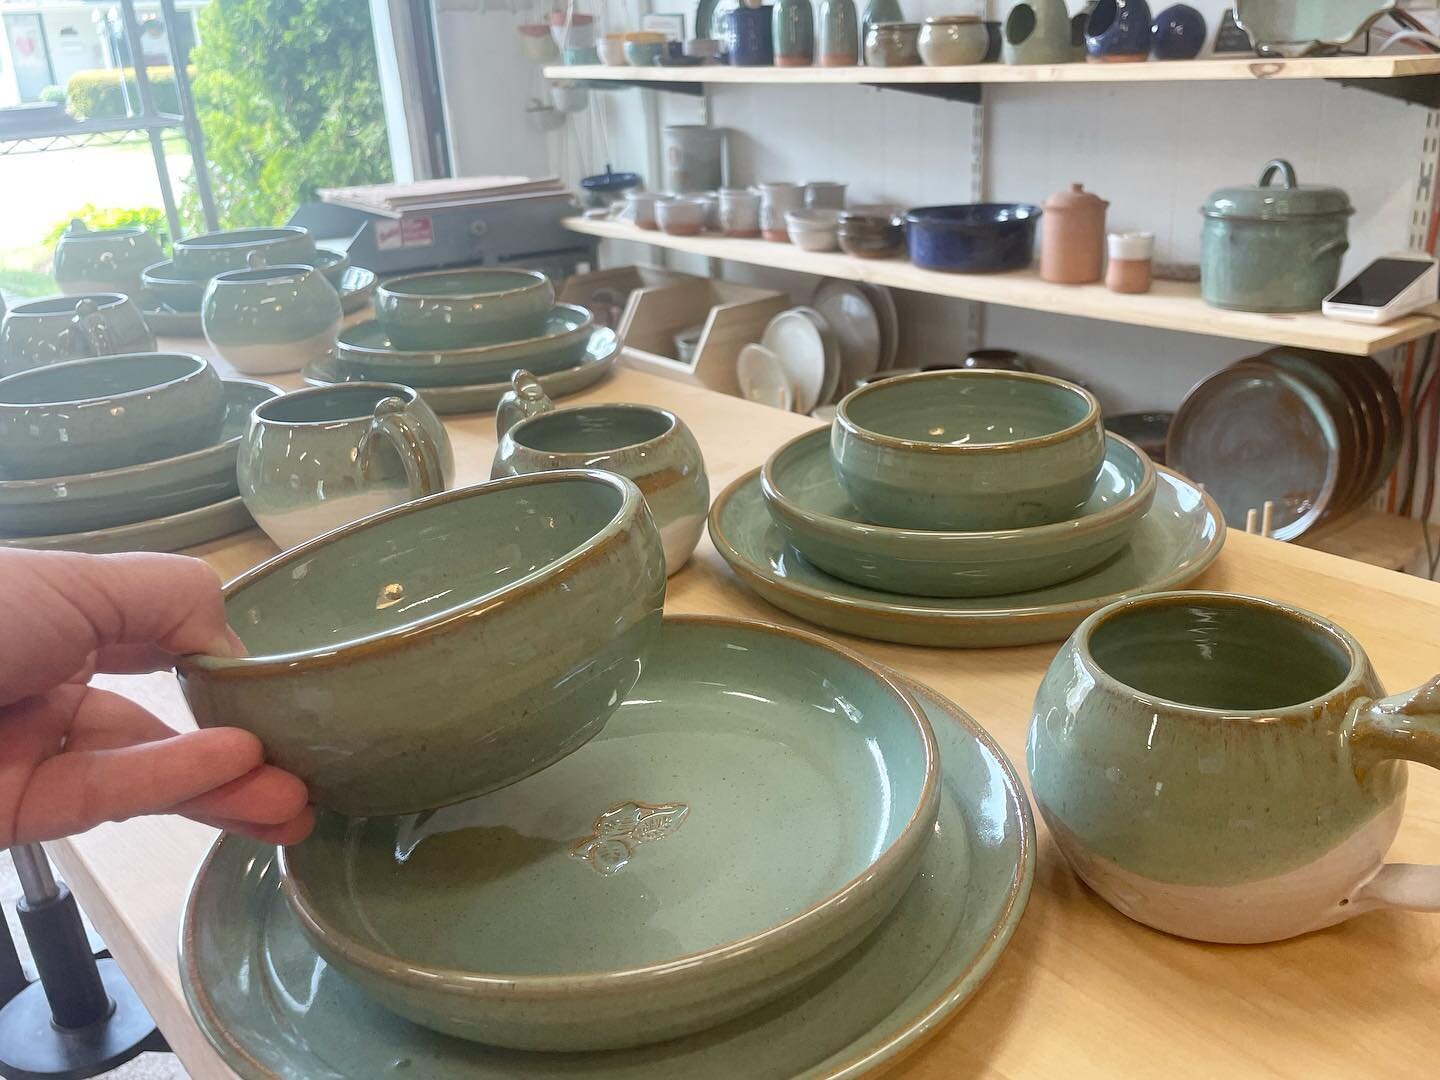 Just staging a few photos of this custom dining set before it ships off to its new home. I&rsquo;m so honored to be a part of this new couple&rsquo;s home and many years of happy meals served up in these dishes. #custommade #pottery #stonewarepottery